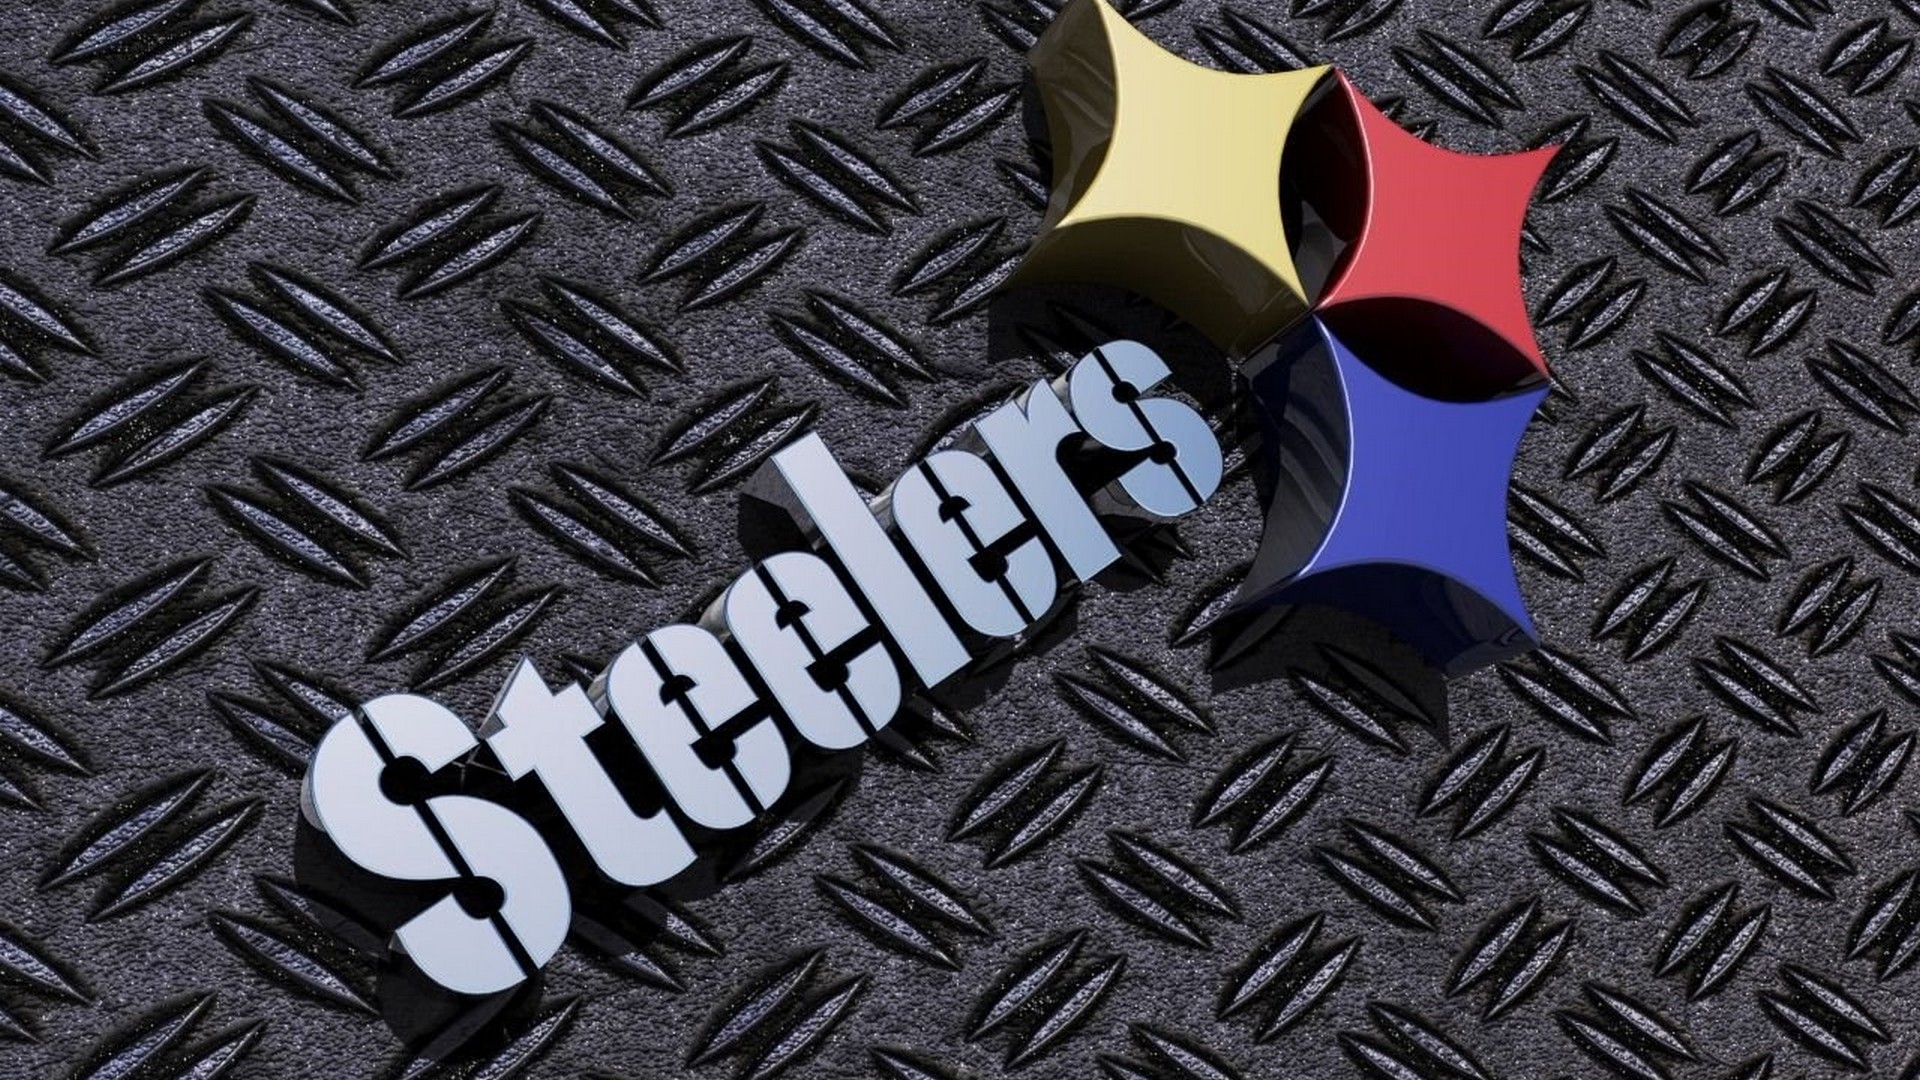 Pitt Steelers Wallpaper With Resolution 1920X1080 pixel. You can make this wallpaper for your Mac or Windows Desktop Background, iPhone, Android or Tablet and another Smartphone device for free